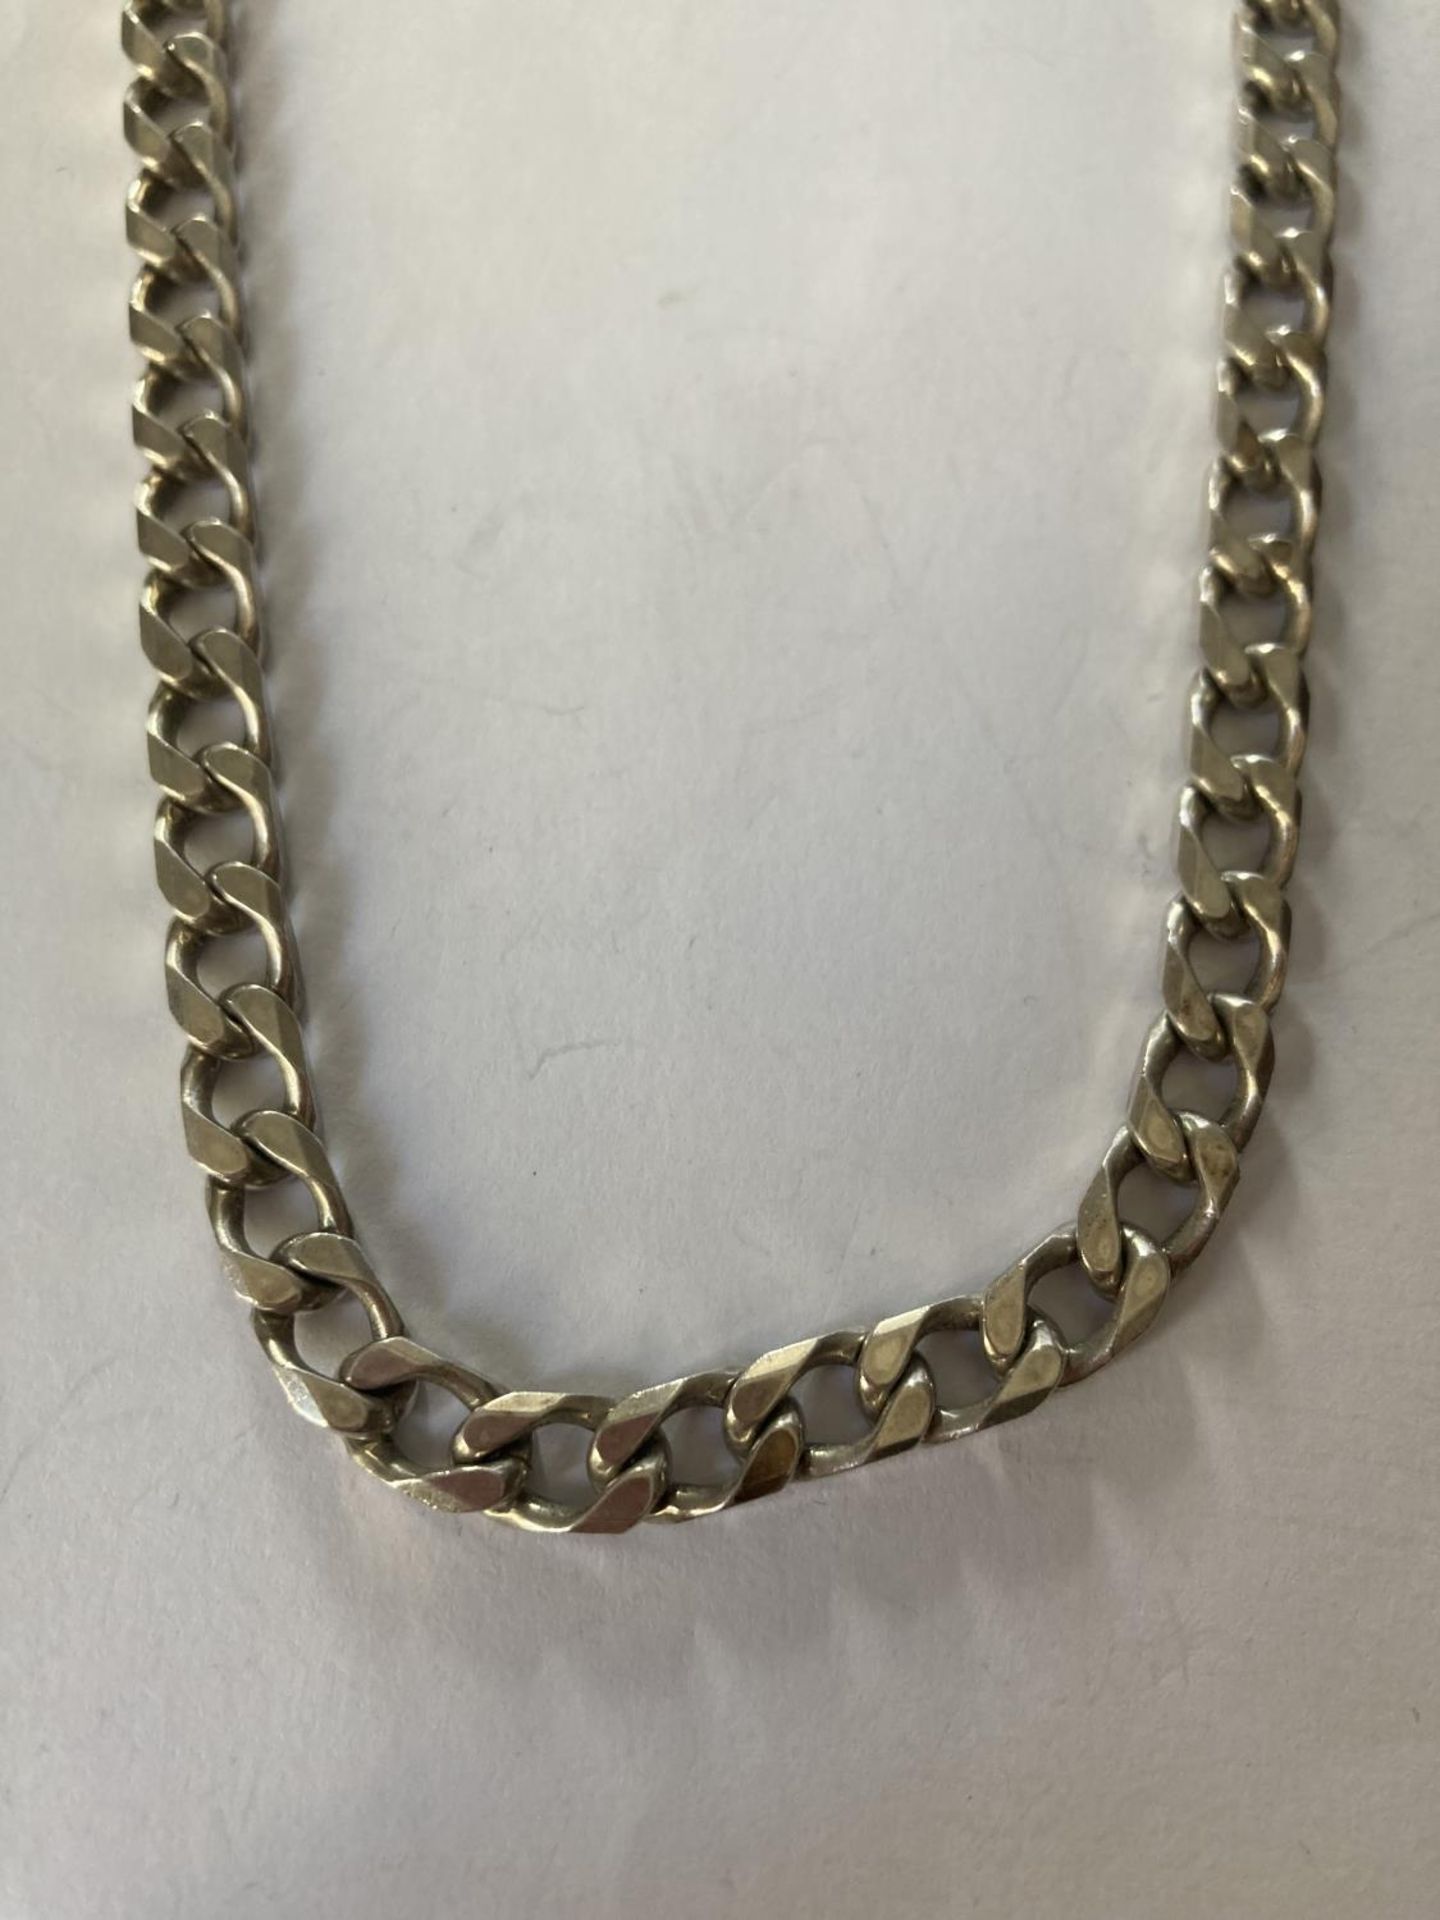 AN 18" SILVER NECK CHAIN - Image 2 of 3